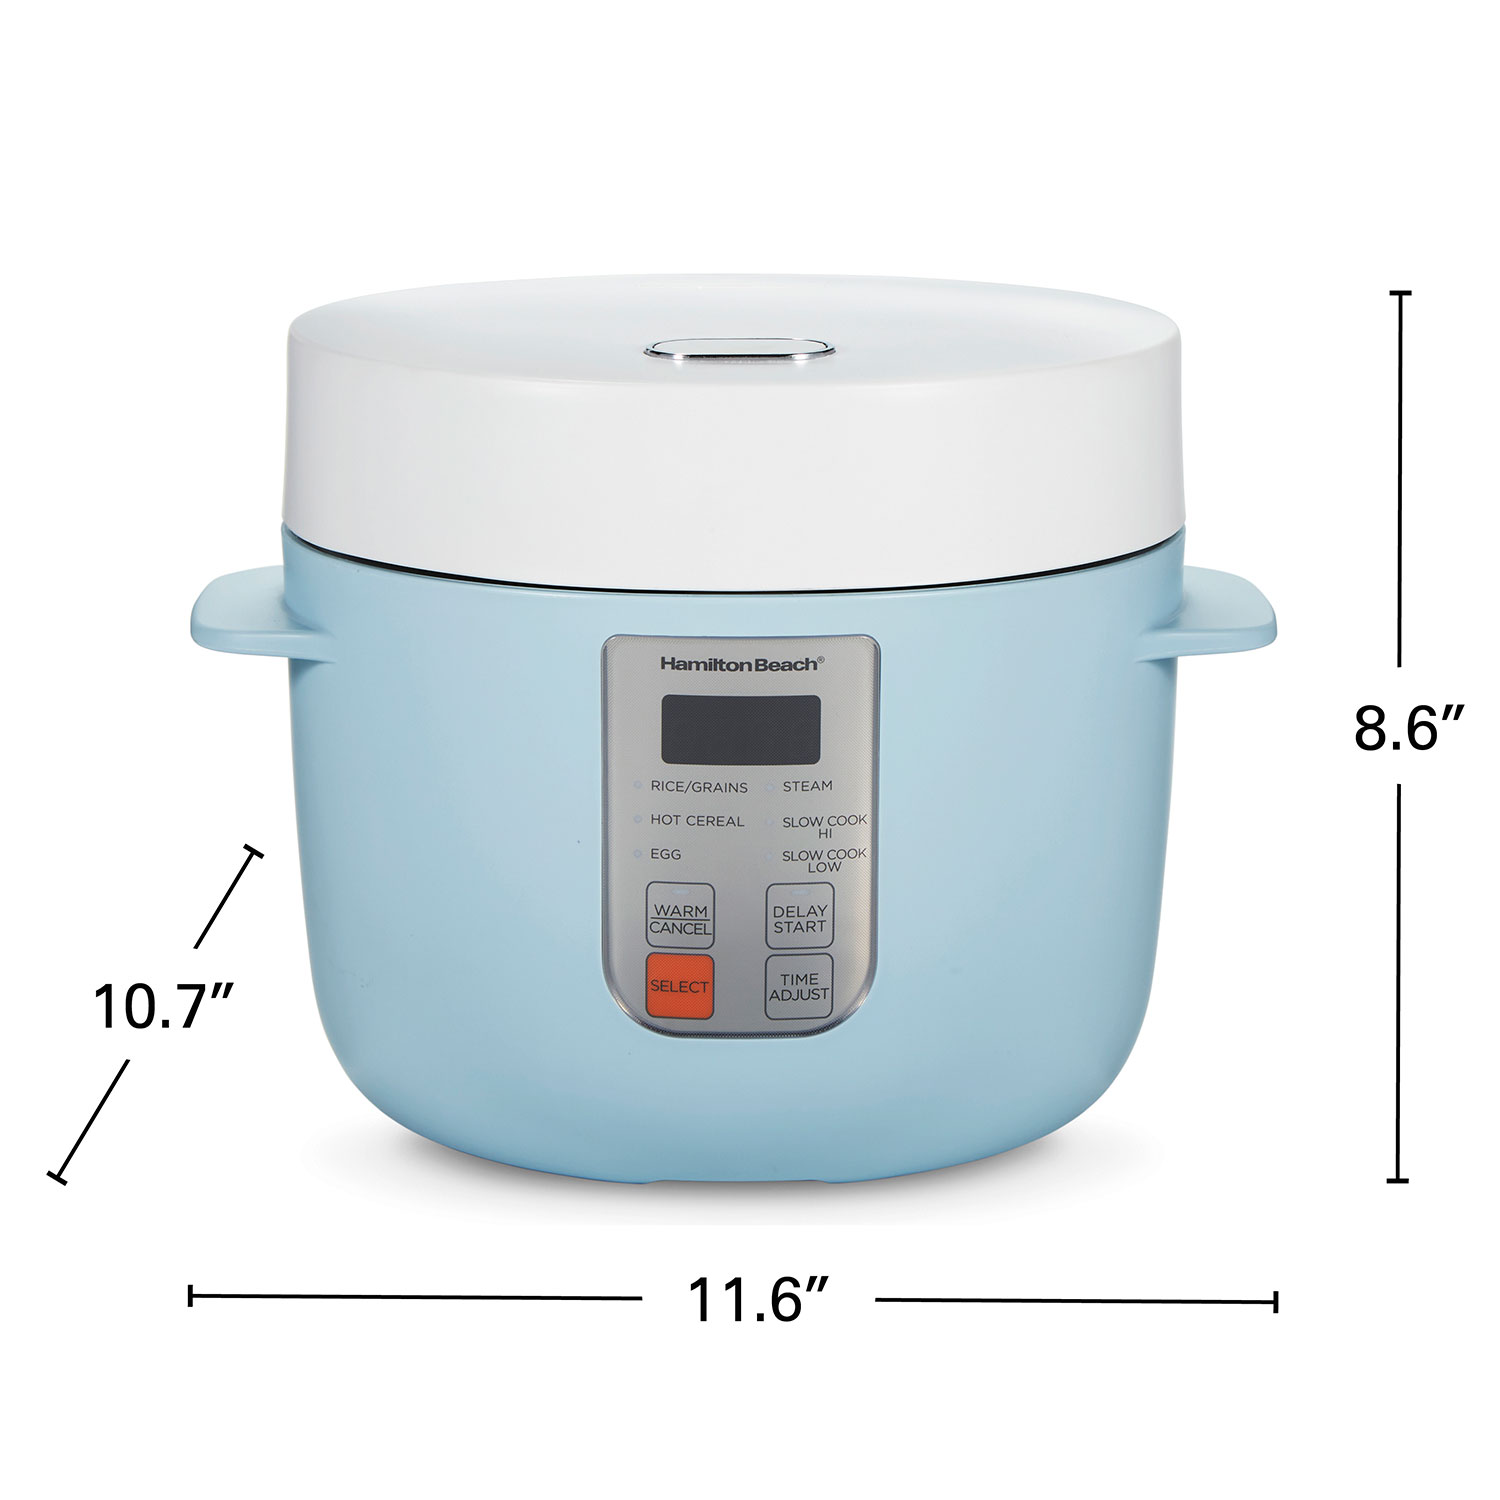 Rival Red 6 Cup Finished Capacity Rice Cooker RC-61